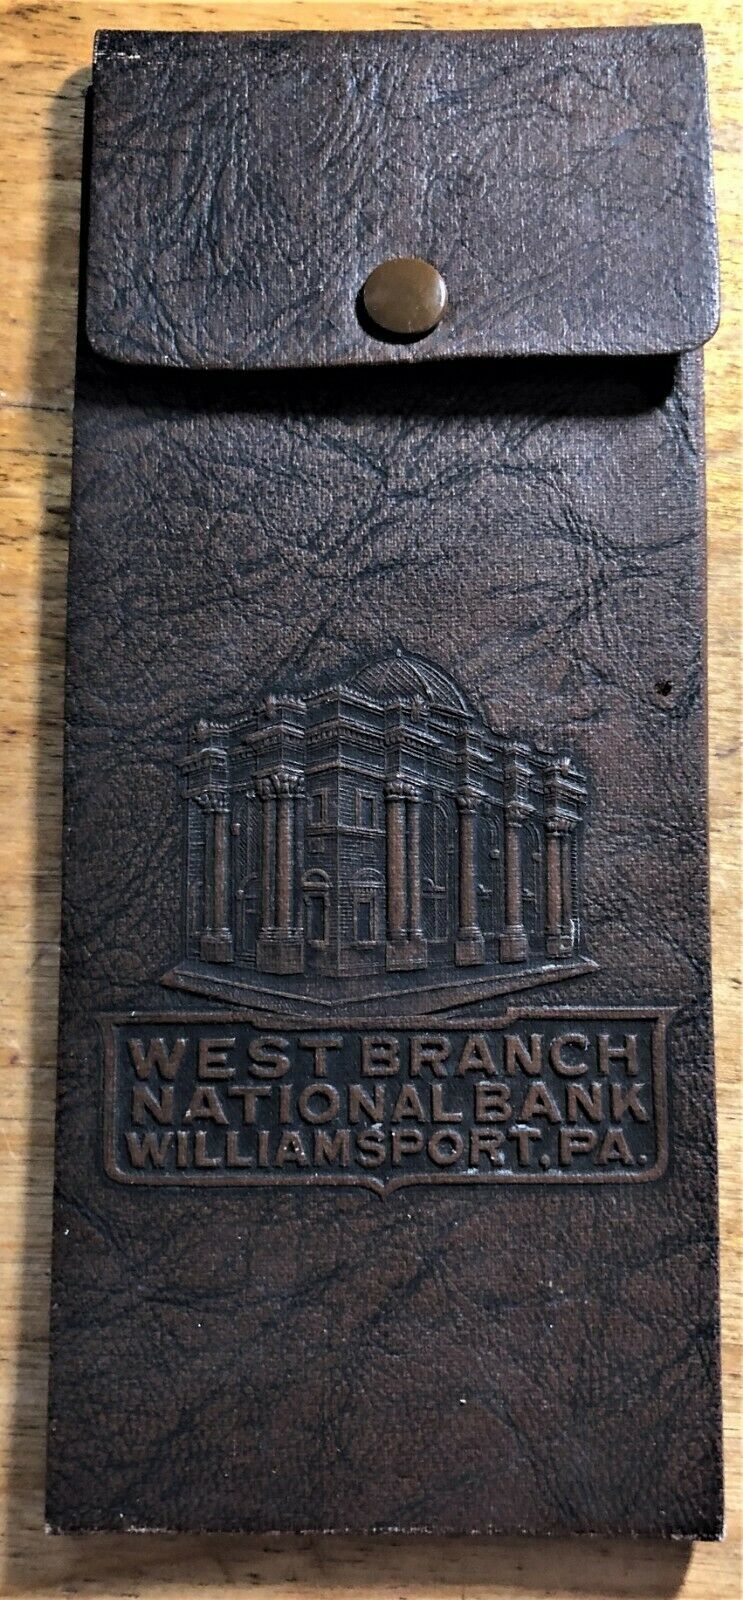 WEST BRANCH NATIONAL BANK (1505) of WILLIAMSPORT PENNSYLVANIA COVER YEAR 1926